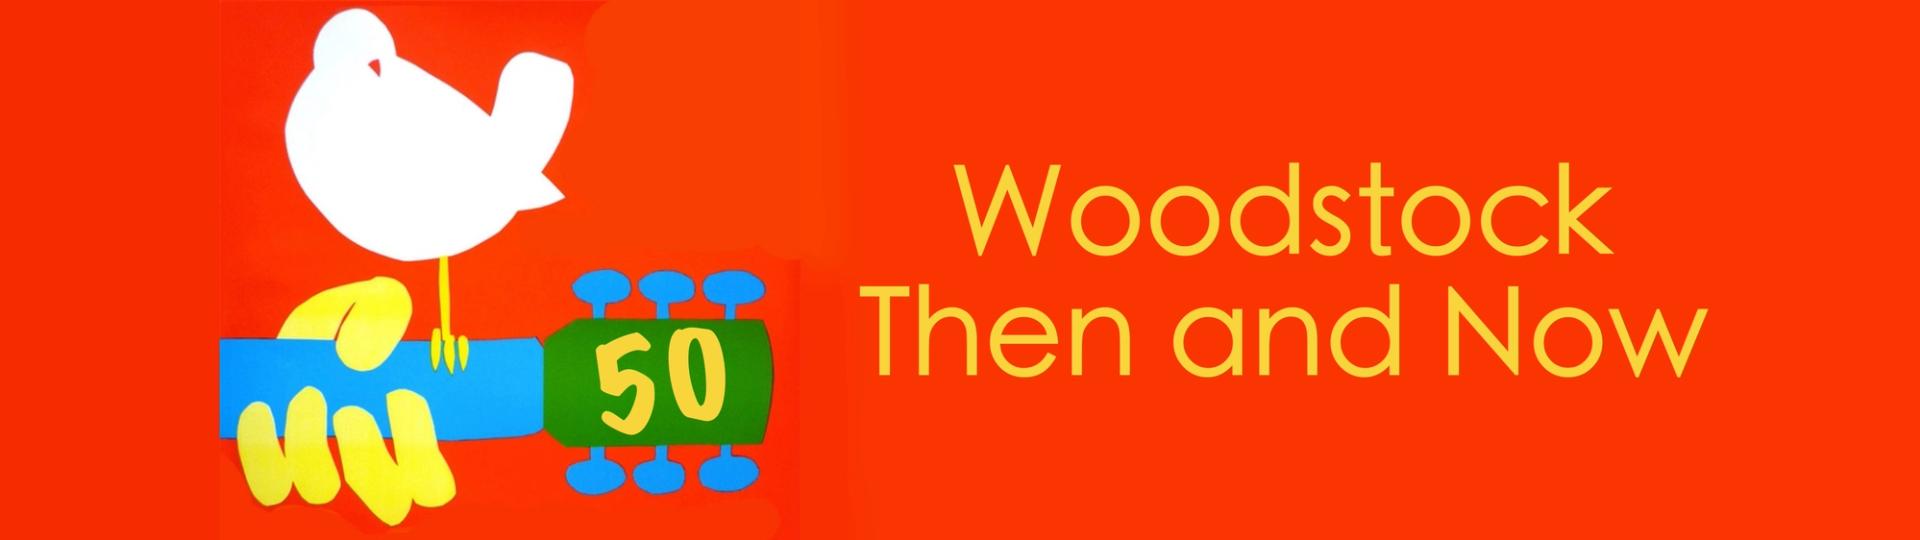 Woodstock Poster Designs: Then and Now - Superside